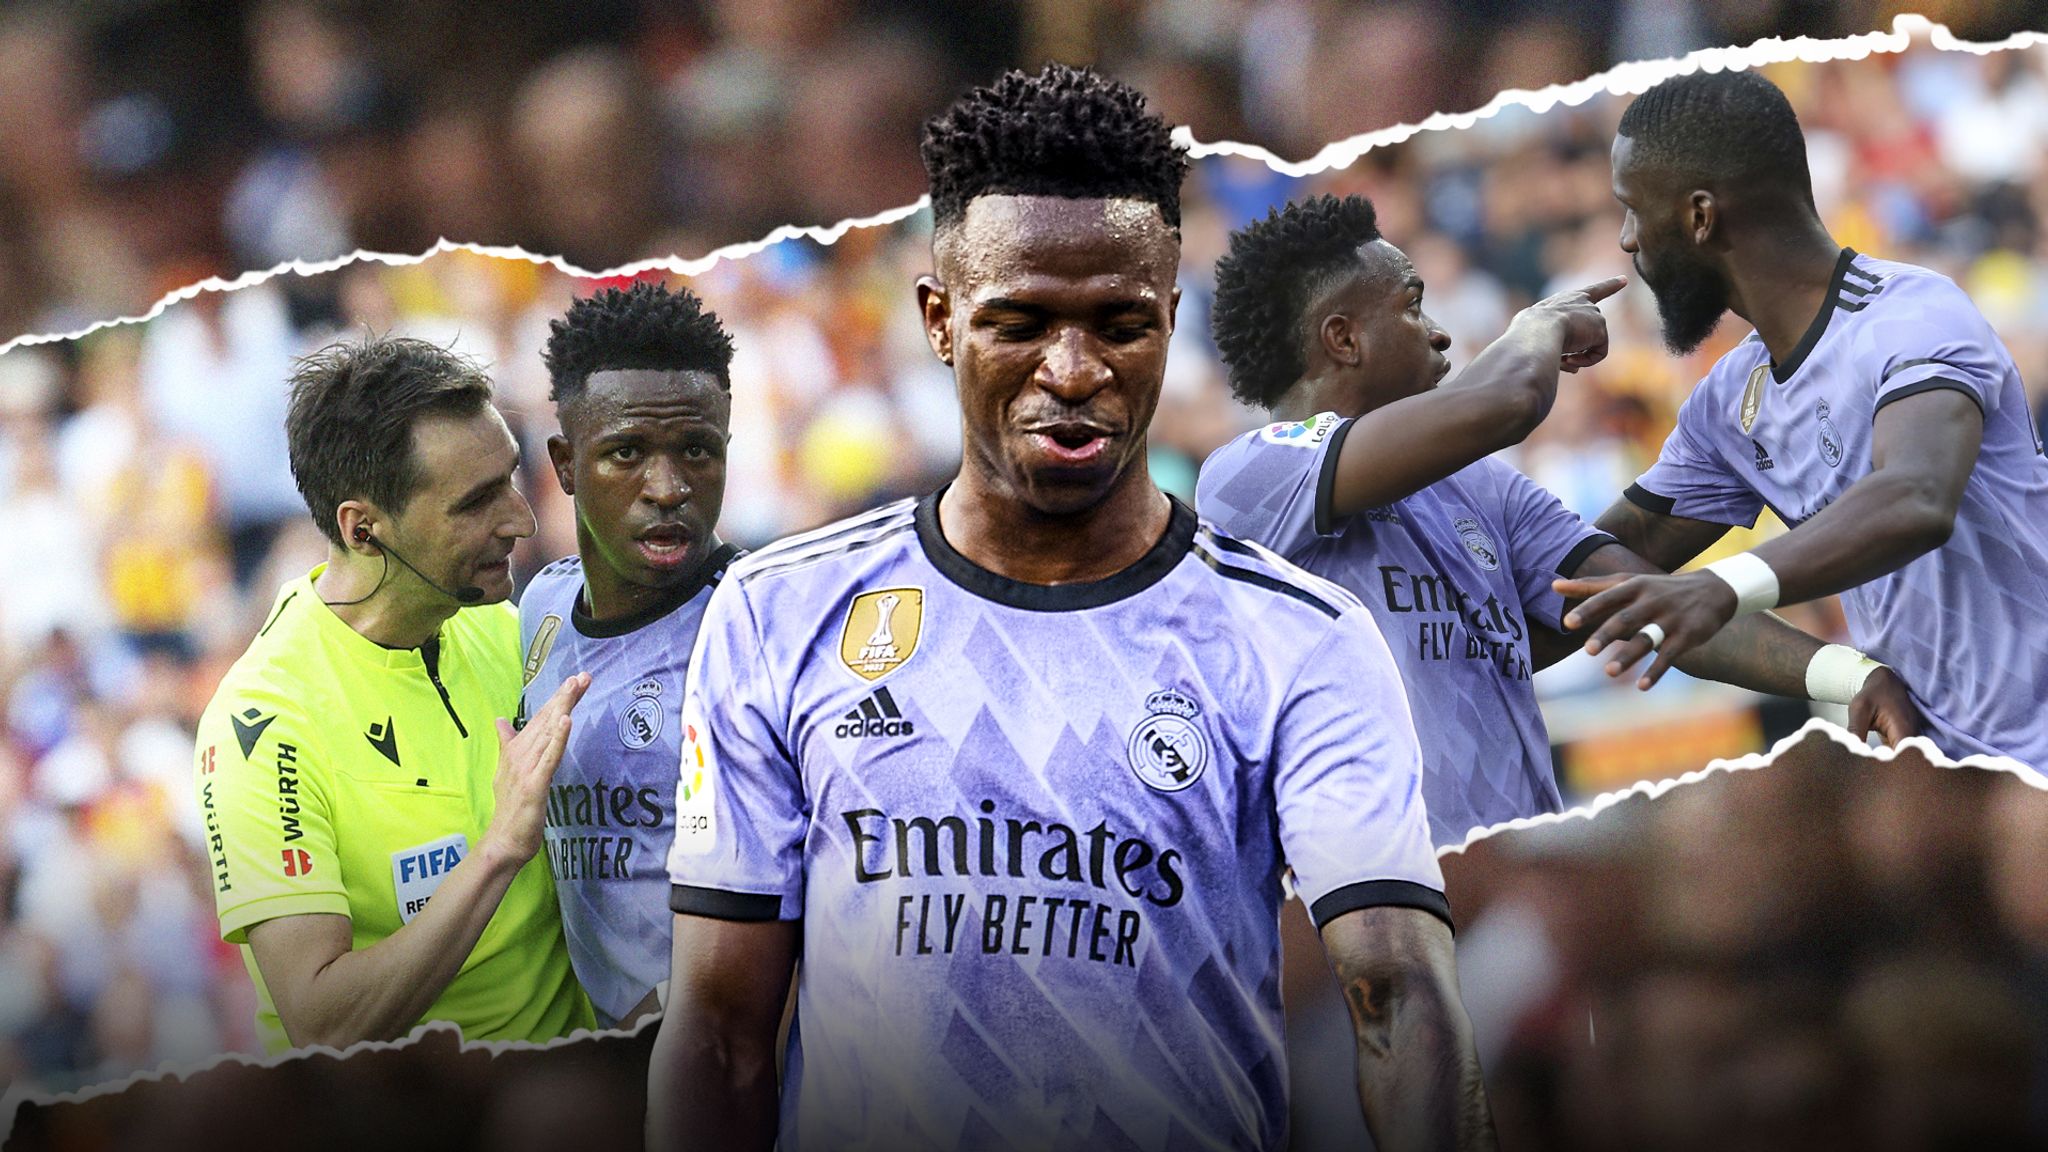 Real Madrid lose 1-0 to Valencia as Vinicius Jr targeted with racist insults